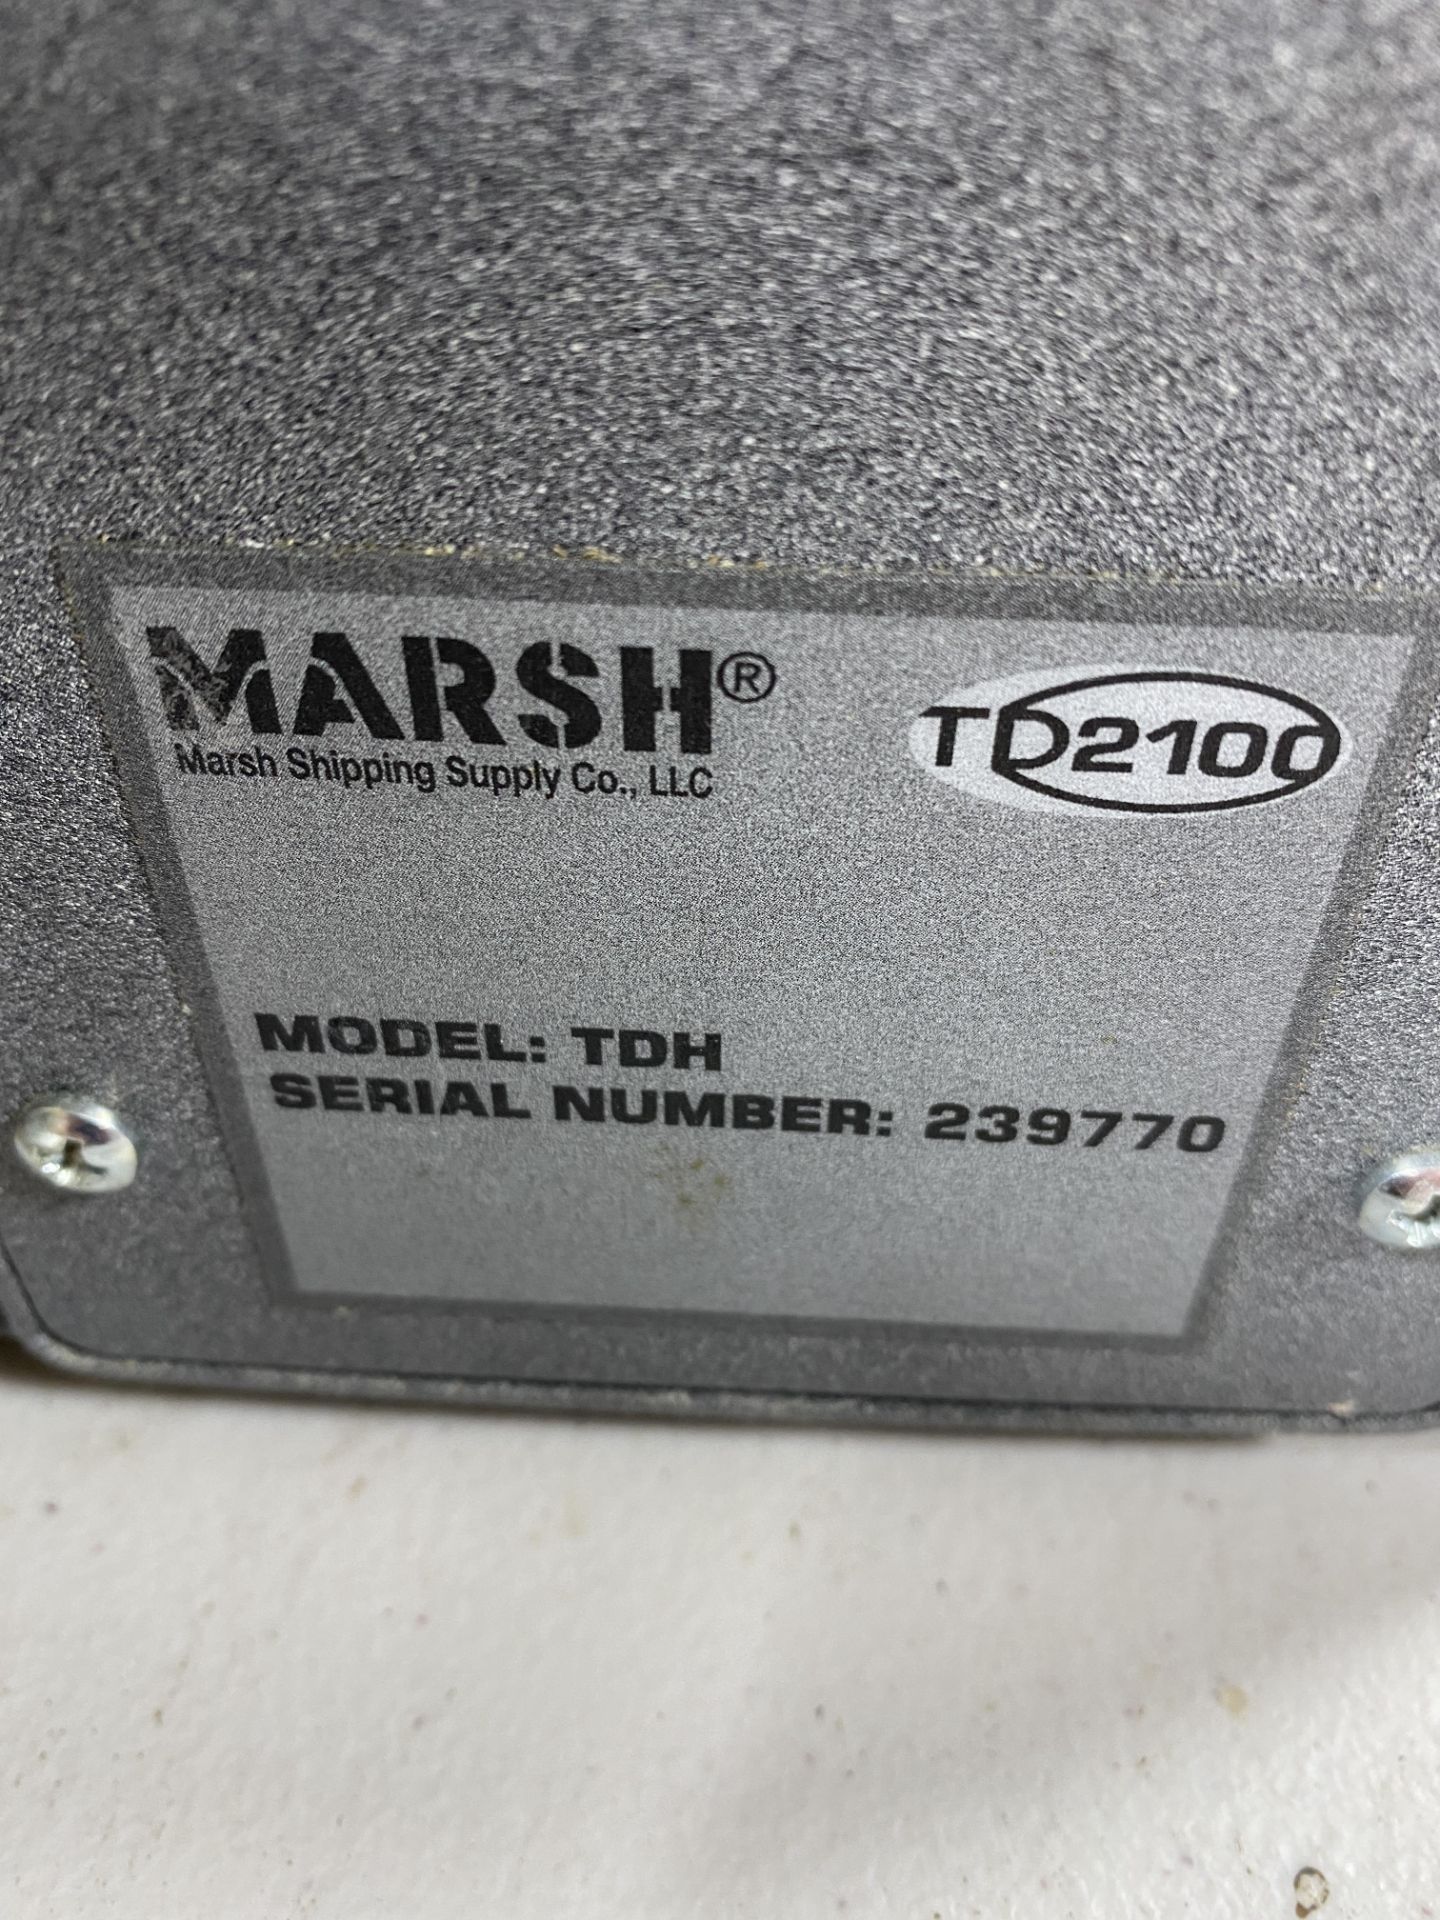 Marsh TD 2100 Tape Shooter, M: TDH, SN: 239770 with 2 Extra Rolls of Tape - Image 2 of 3